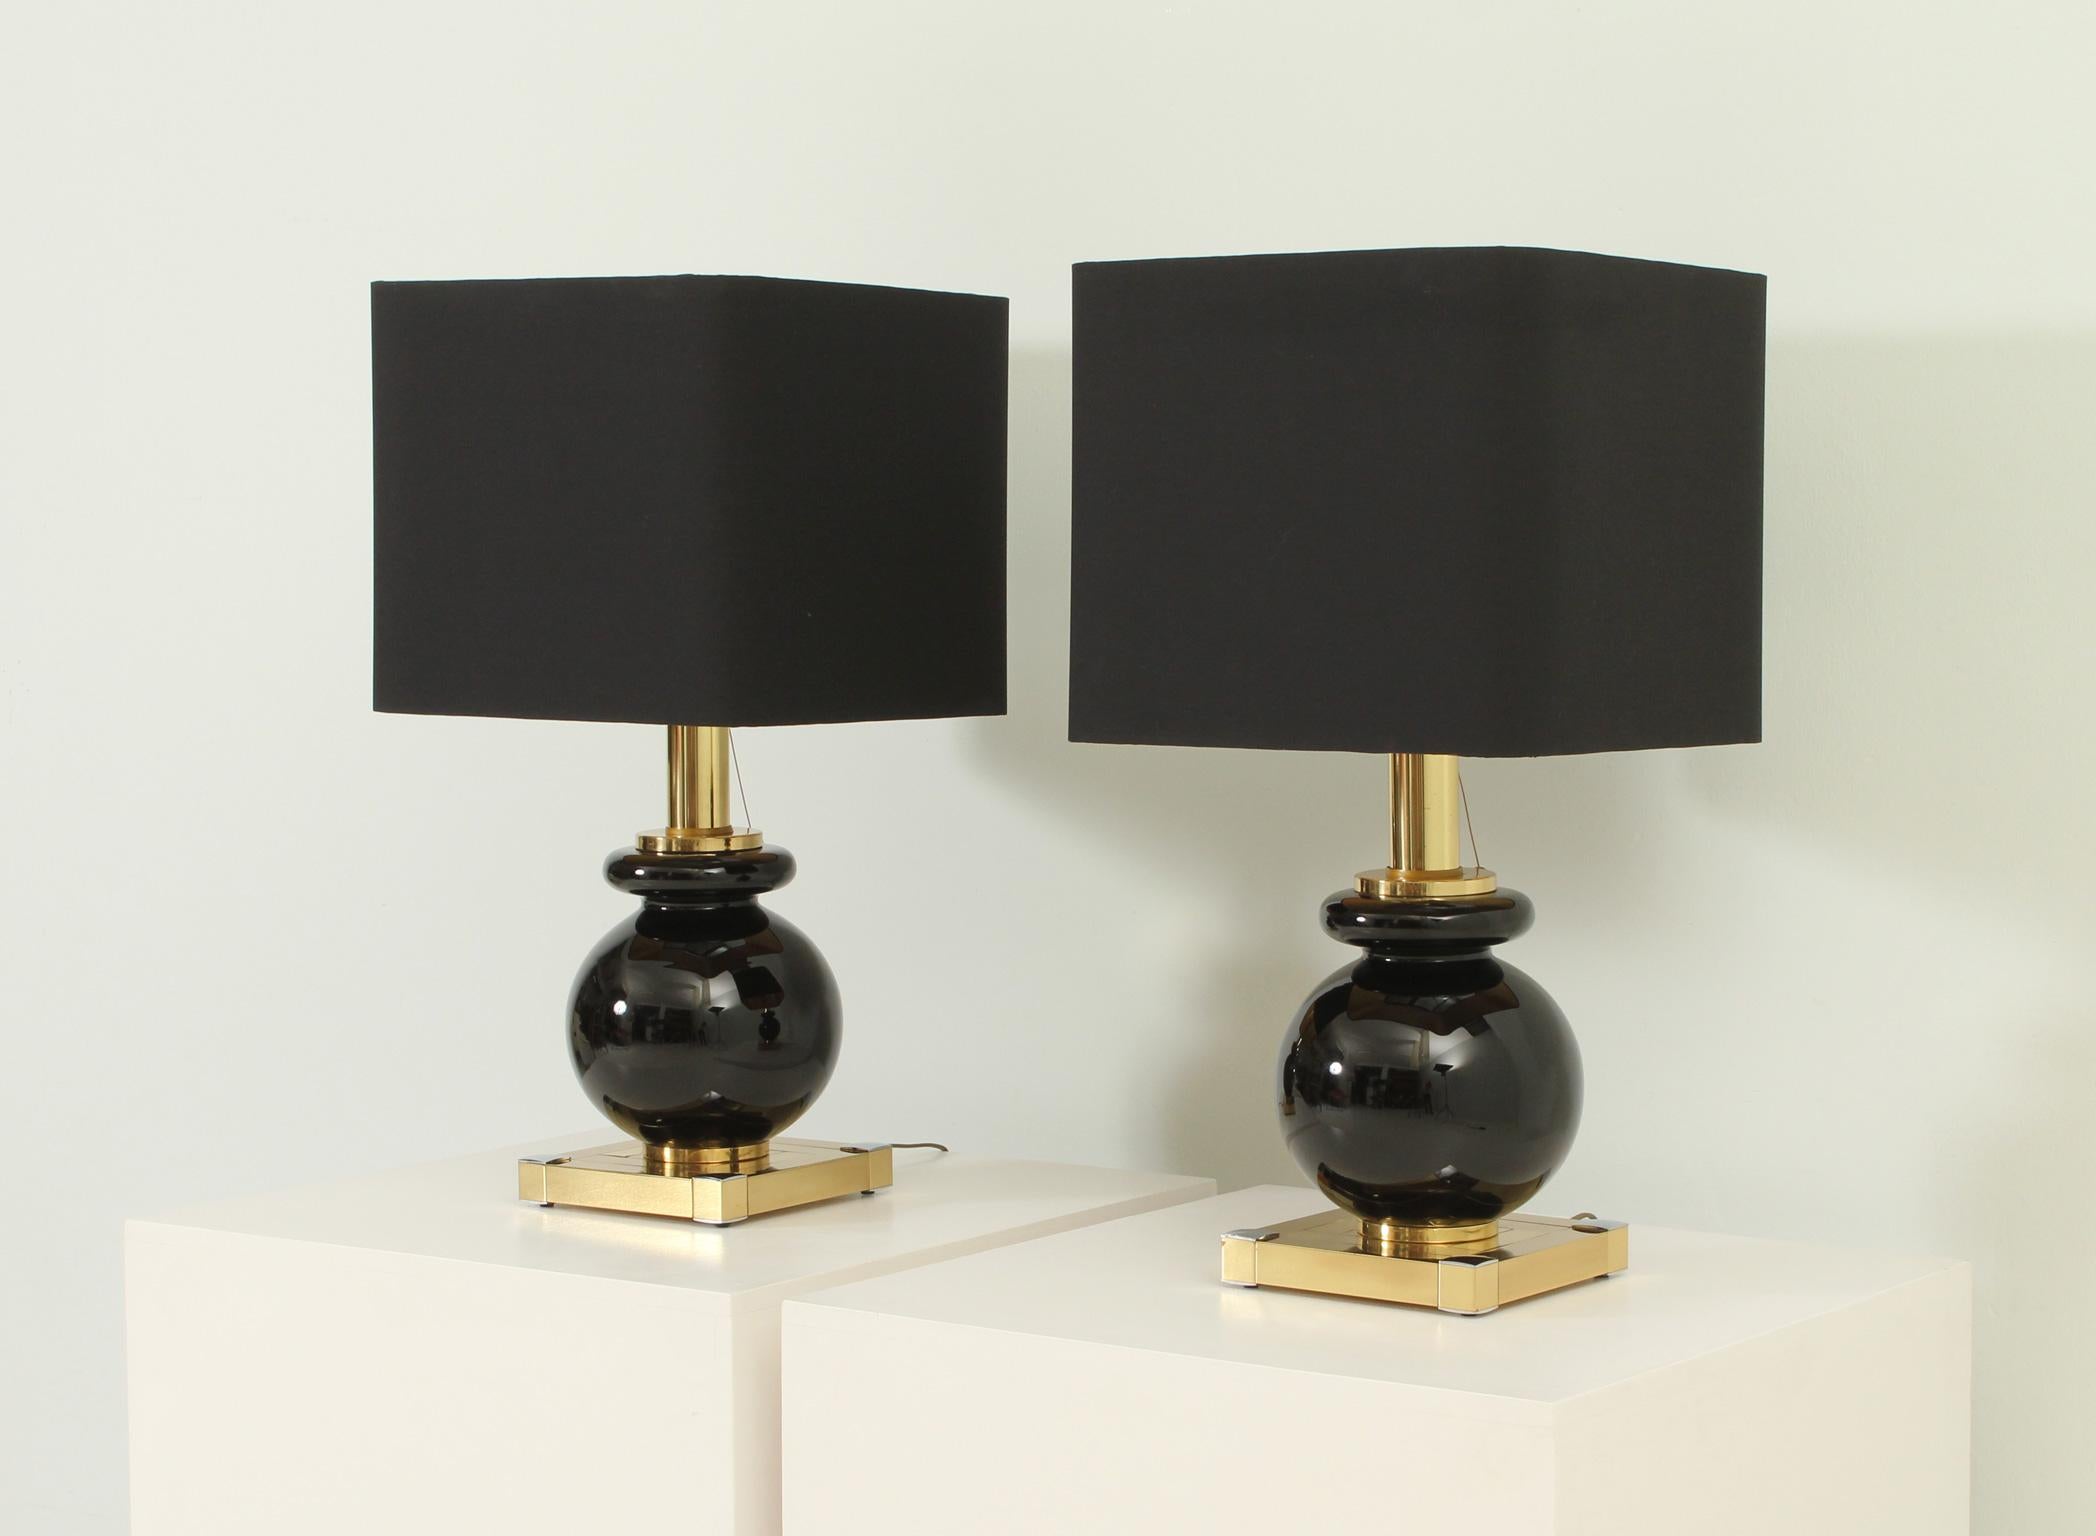 Pair of table lamps designed in 1970s by BD Lumica, Spain. Brass and chromed metal structure with black glass ball and three bulbs, shades with new fabric.